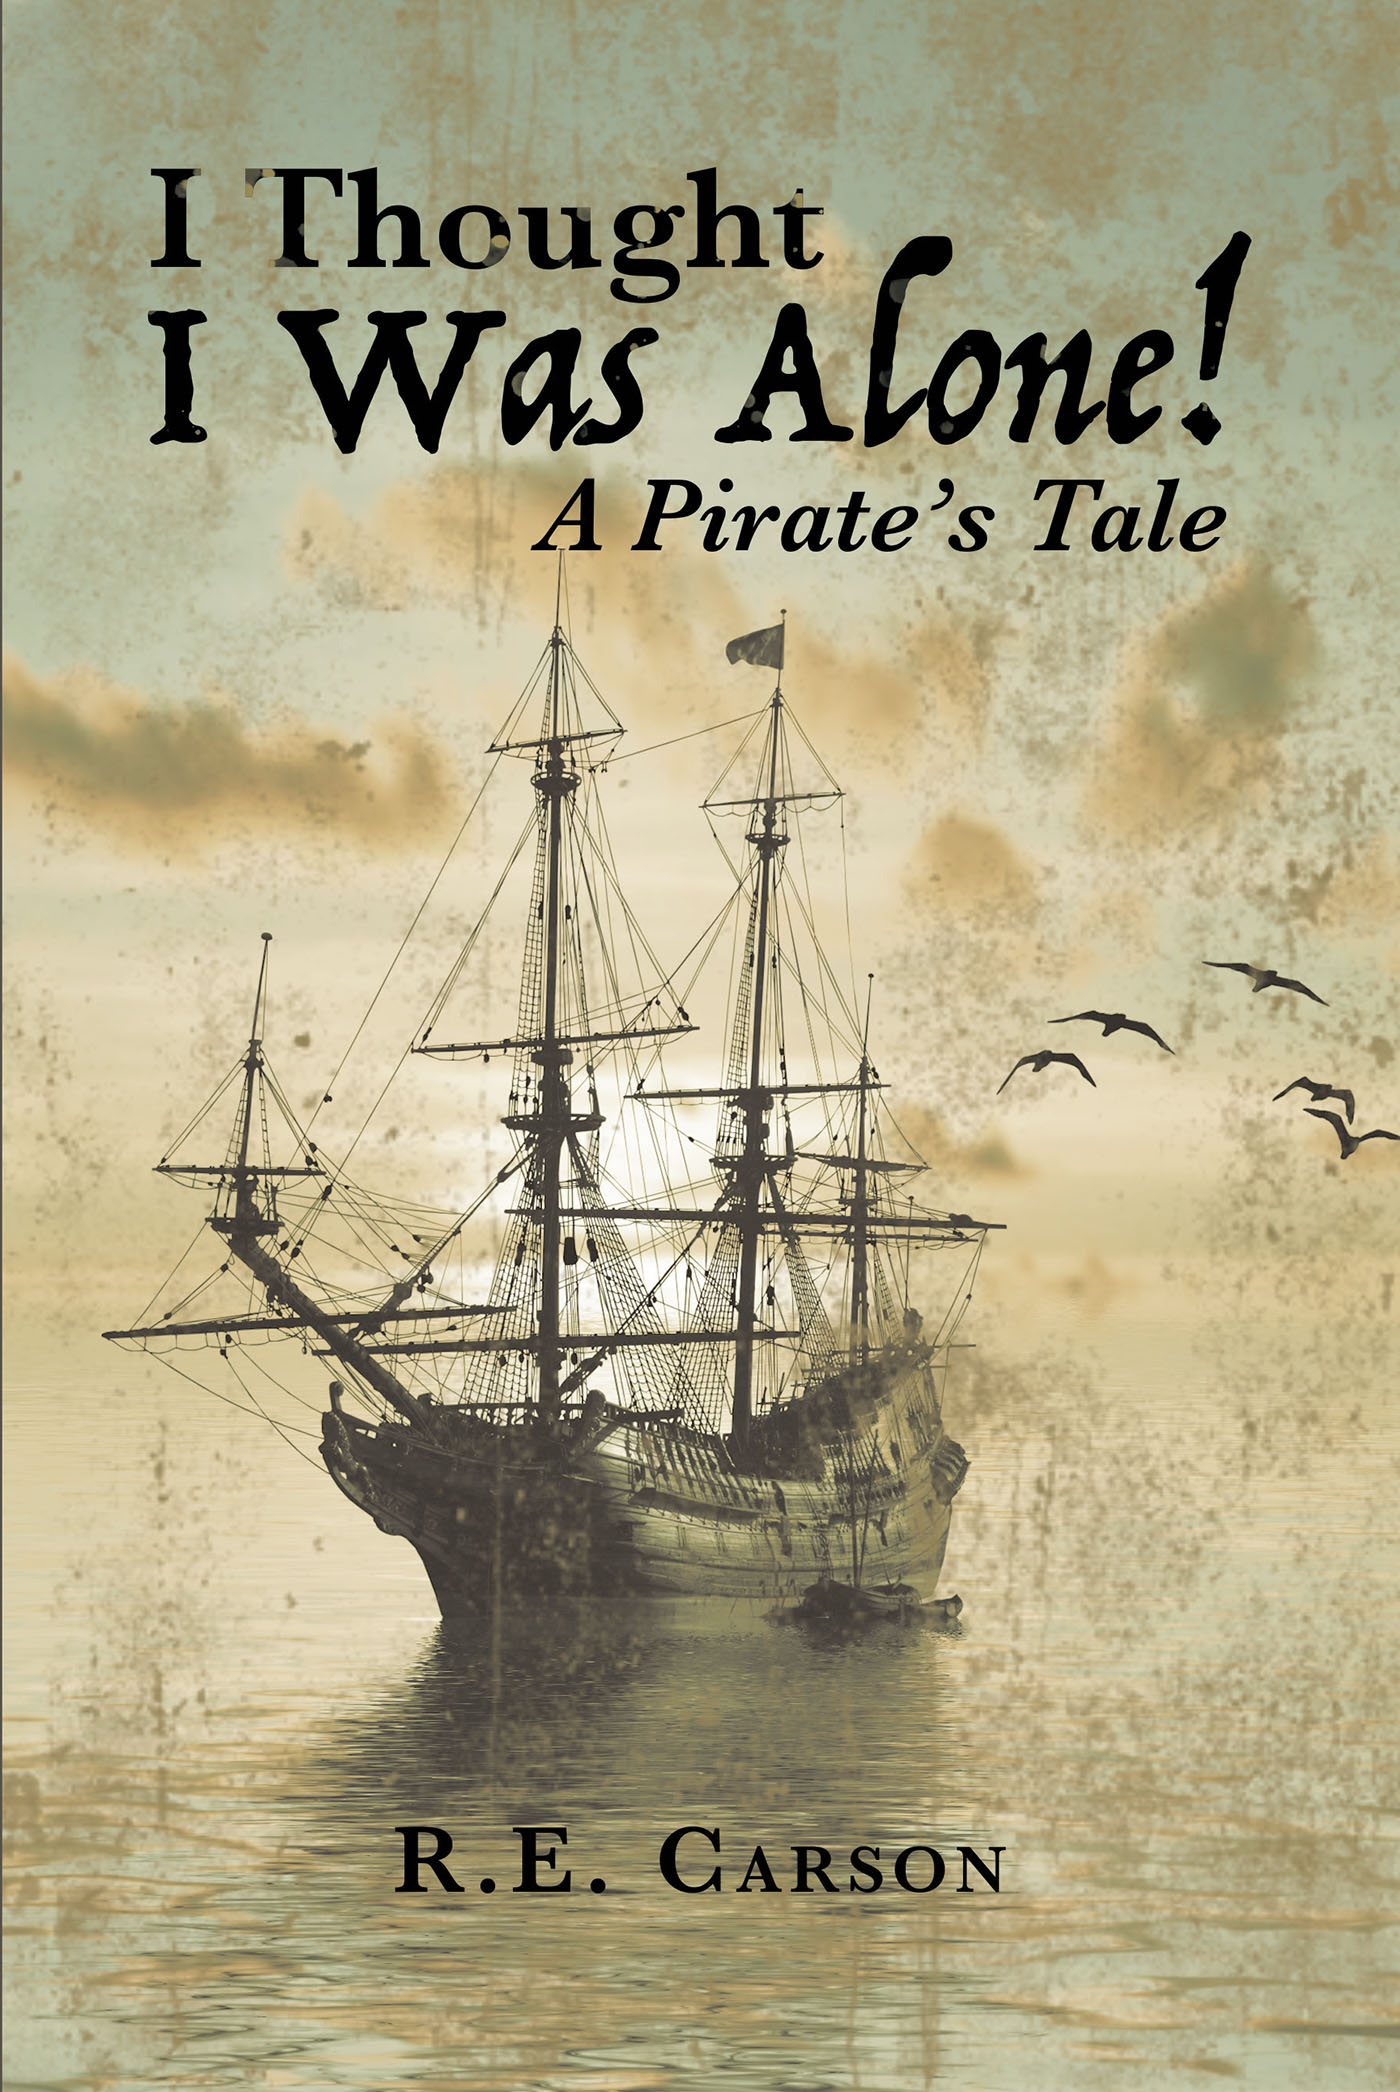 I Thought I was Alone! A Pirate's Tale Cover Image